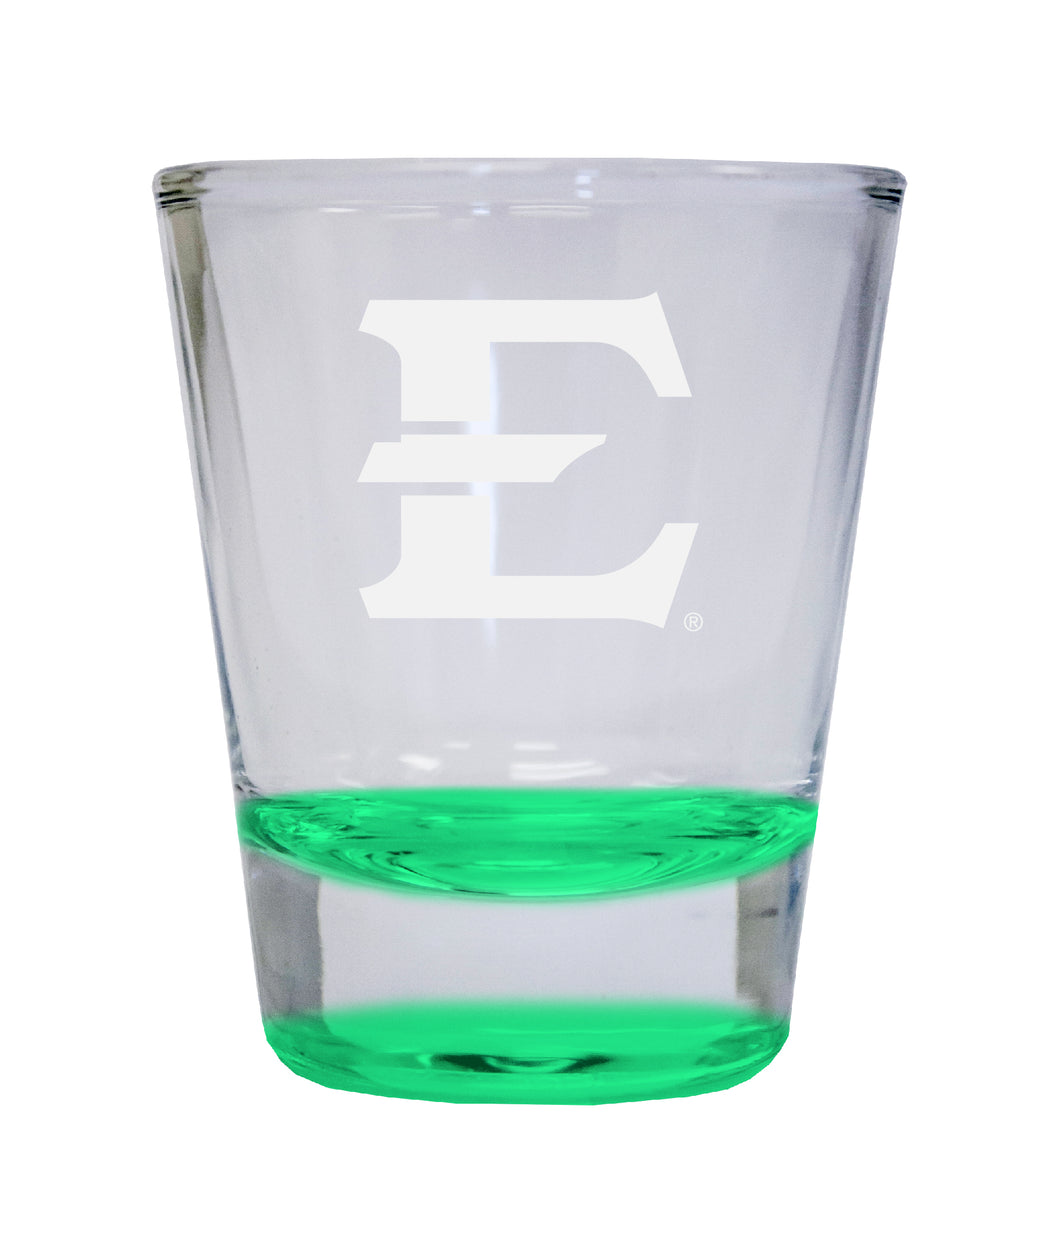 East Tennessee State University Etched Round Shot Glass 2 oz Green